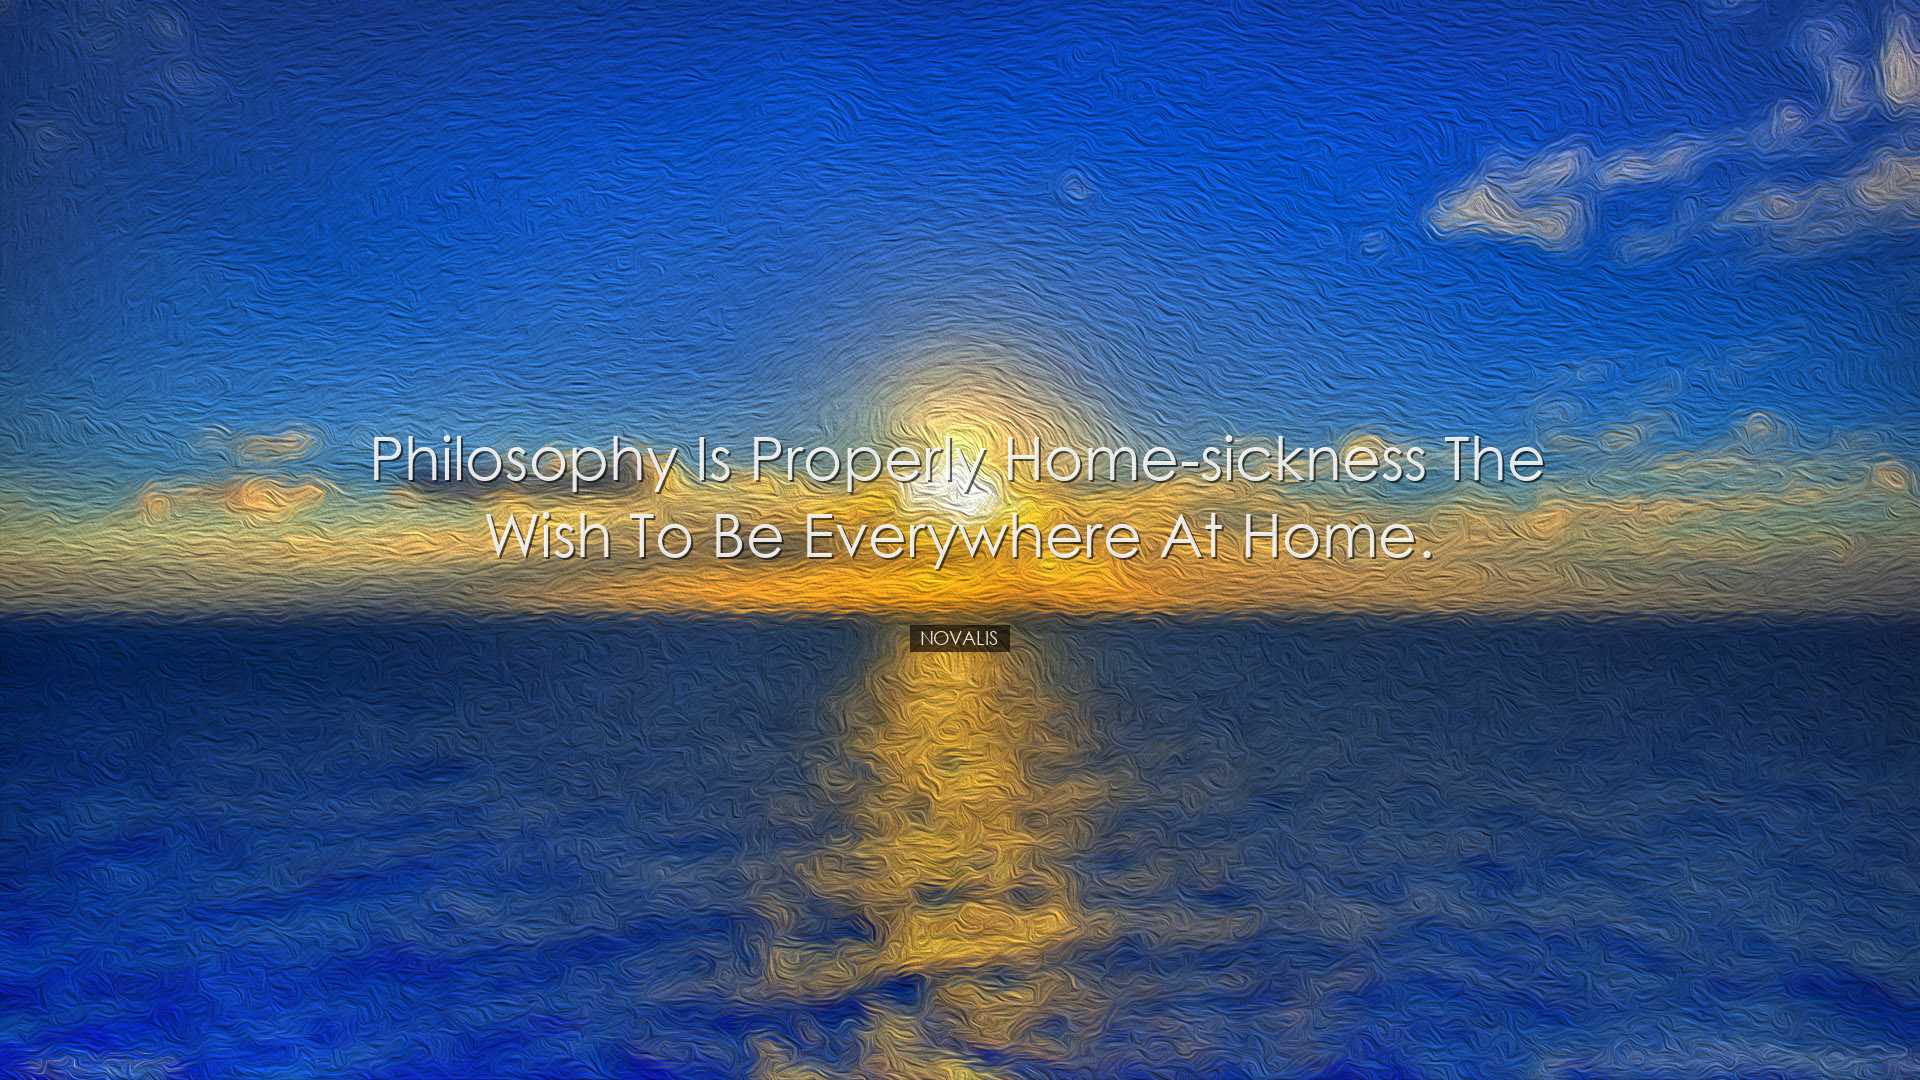 Philosophy is properly home-sickness the wish to be everywhere at